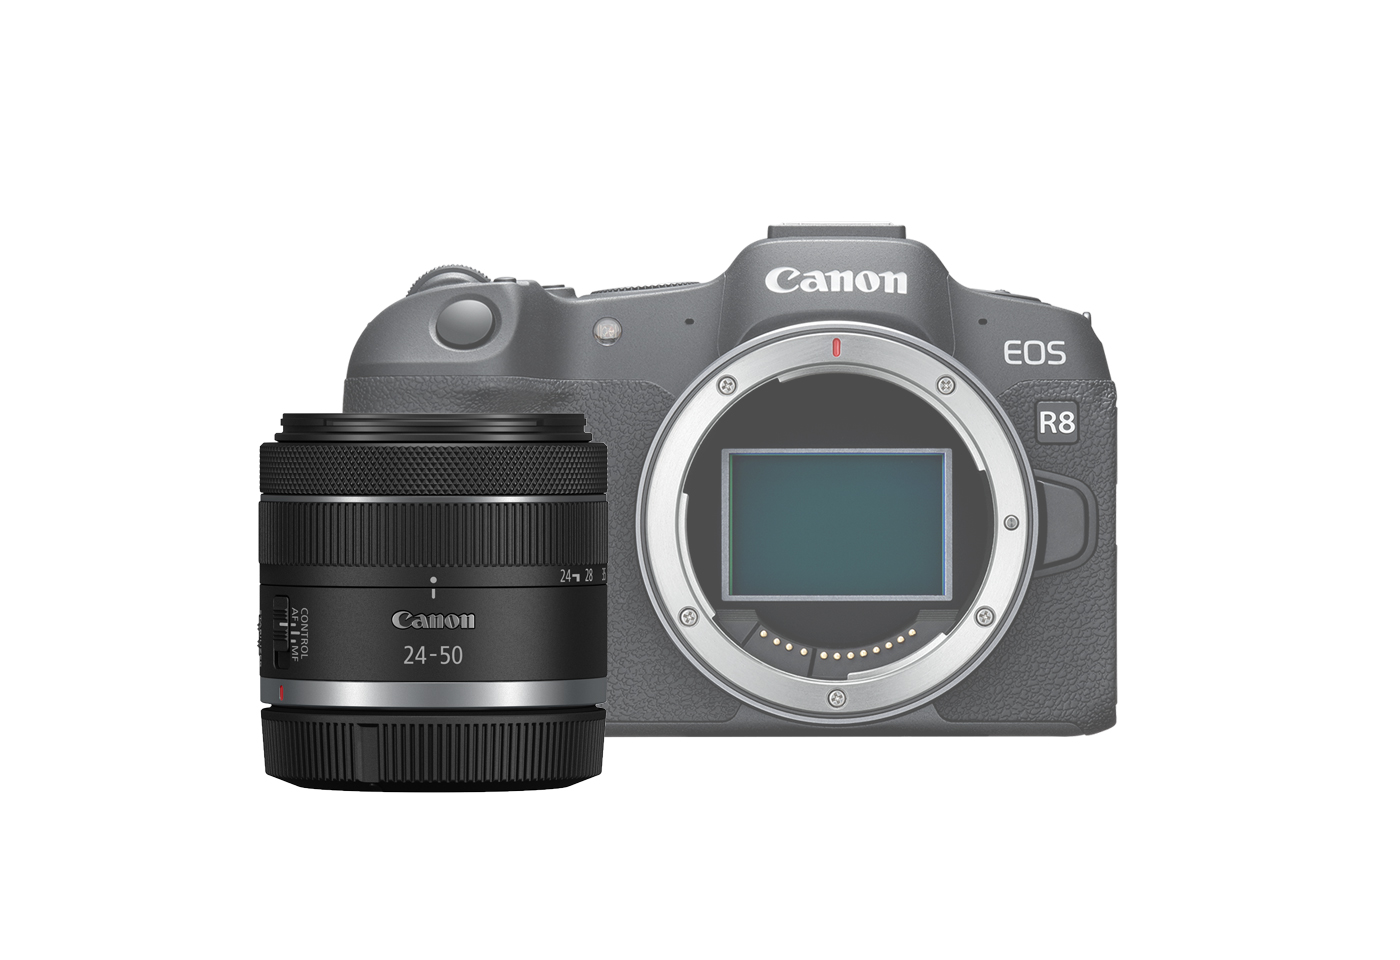 Canon EOS R8 Mirrorless Camera w/ RF 24-50mm f/4.5-6.3 IS STM Lens